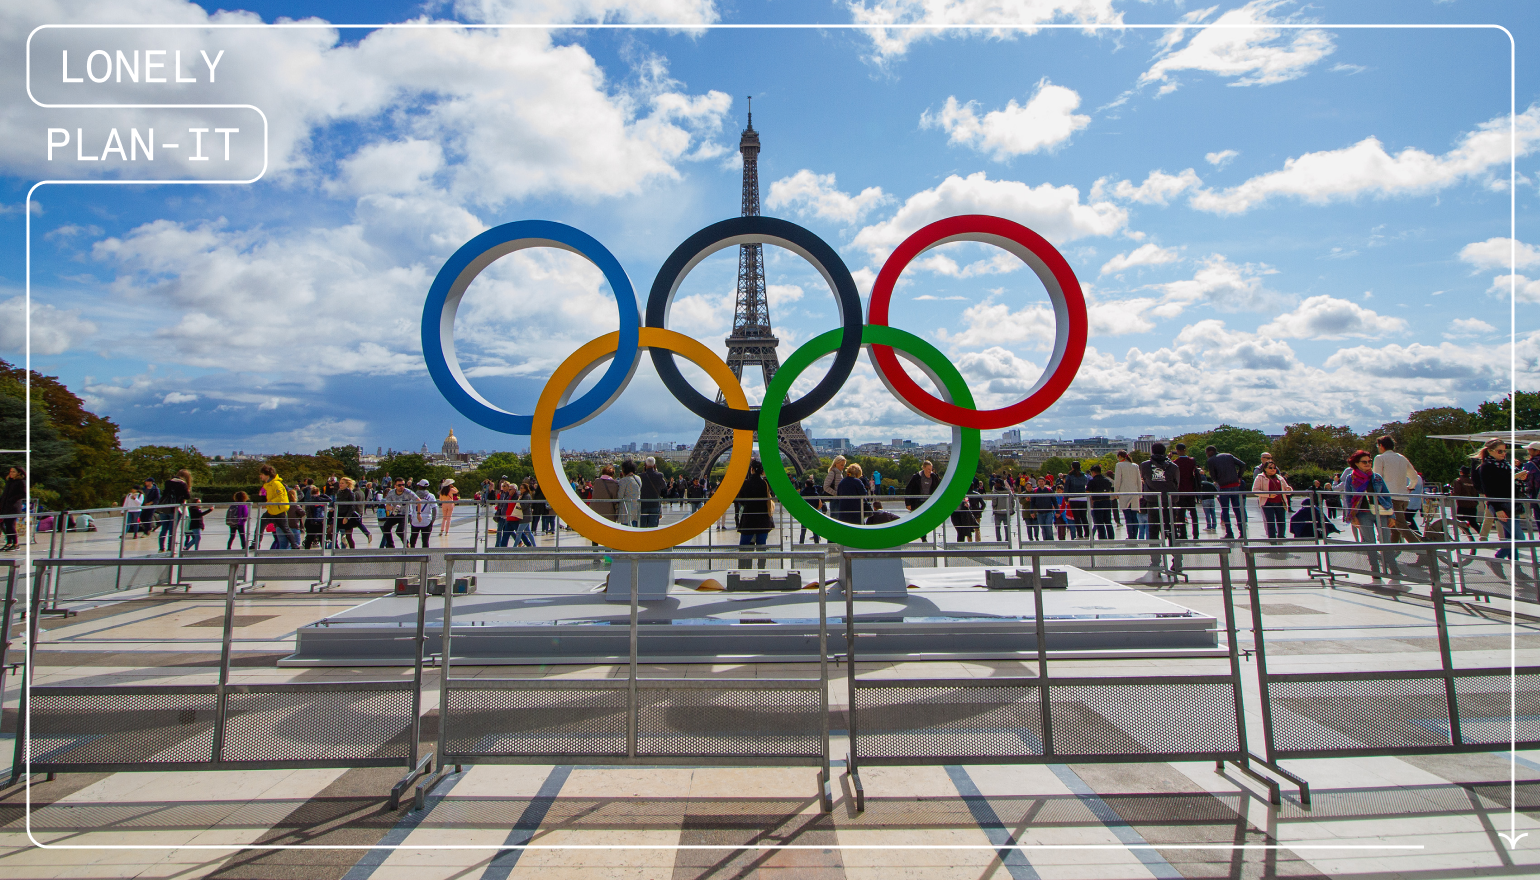 Paris 2024 : a painting for olympic games - 24 for all and all for 1